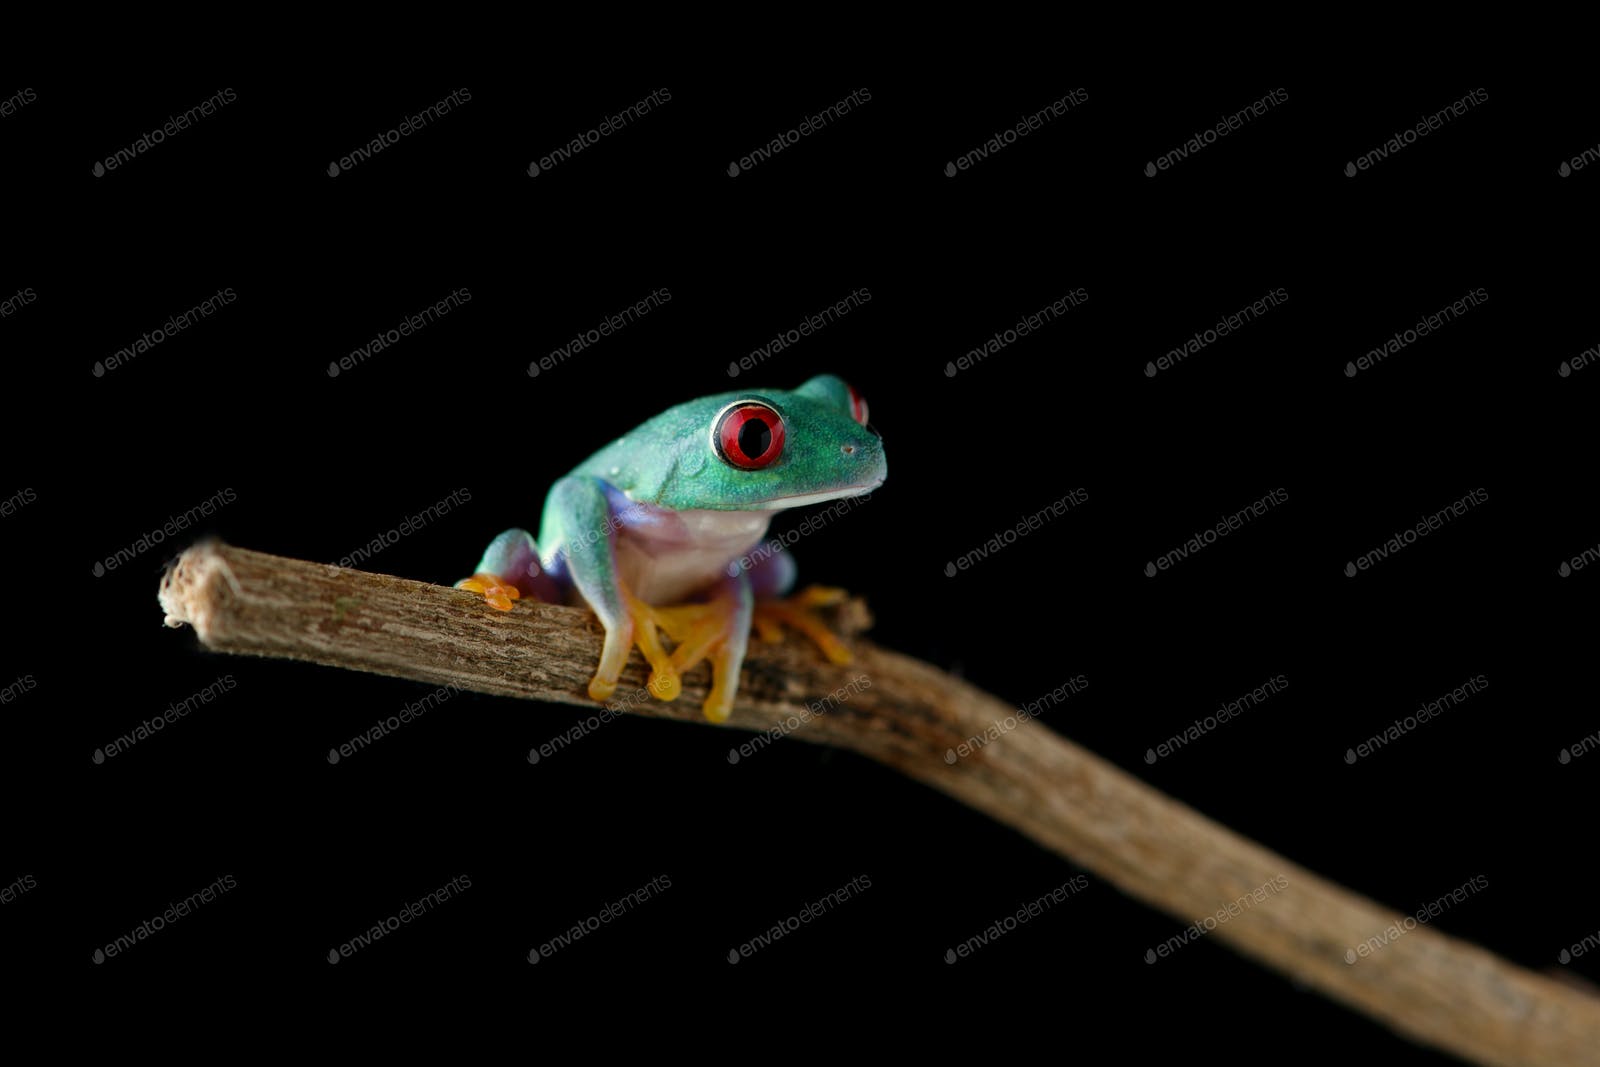 Red eyed tree frog isolated on black backgrounds photo by PetlinDmitry on Envato Elements